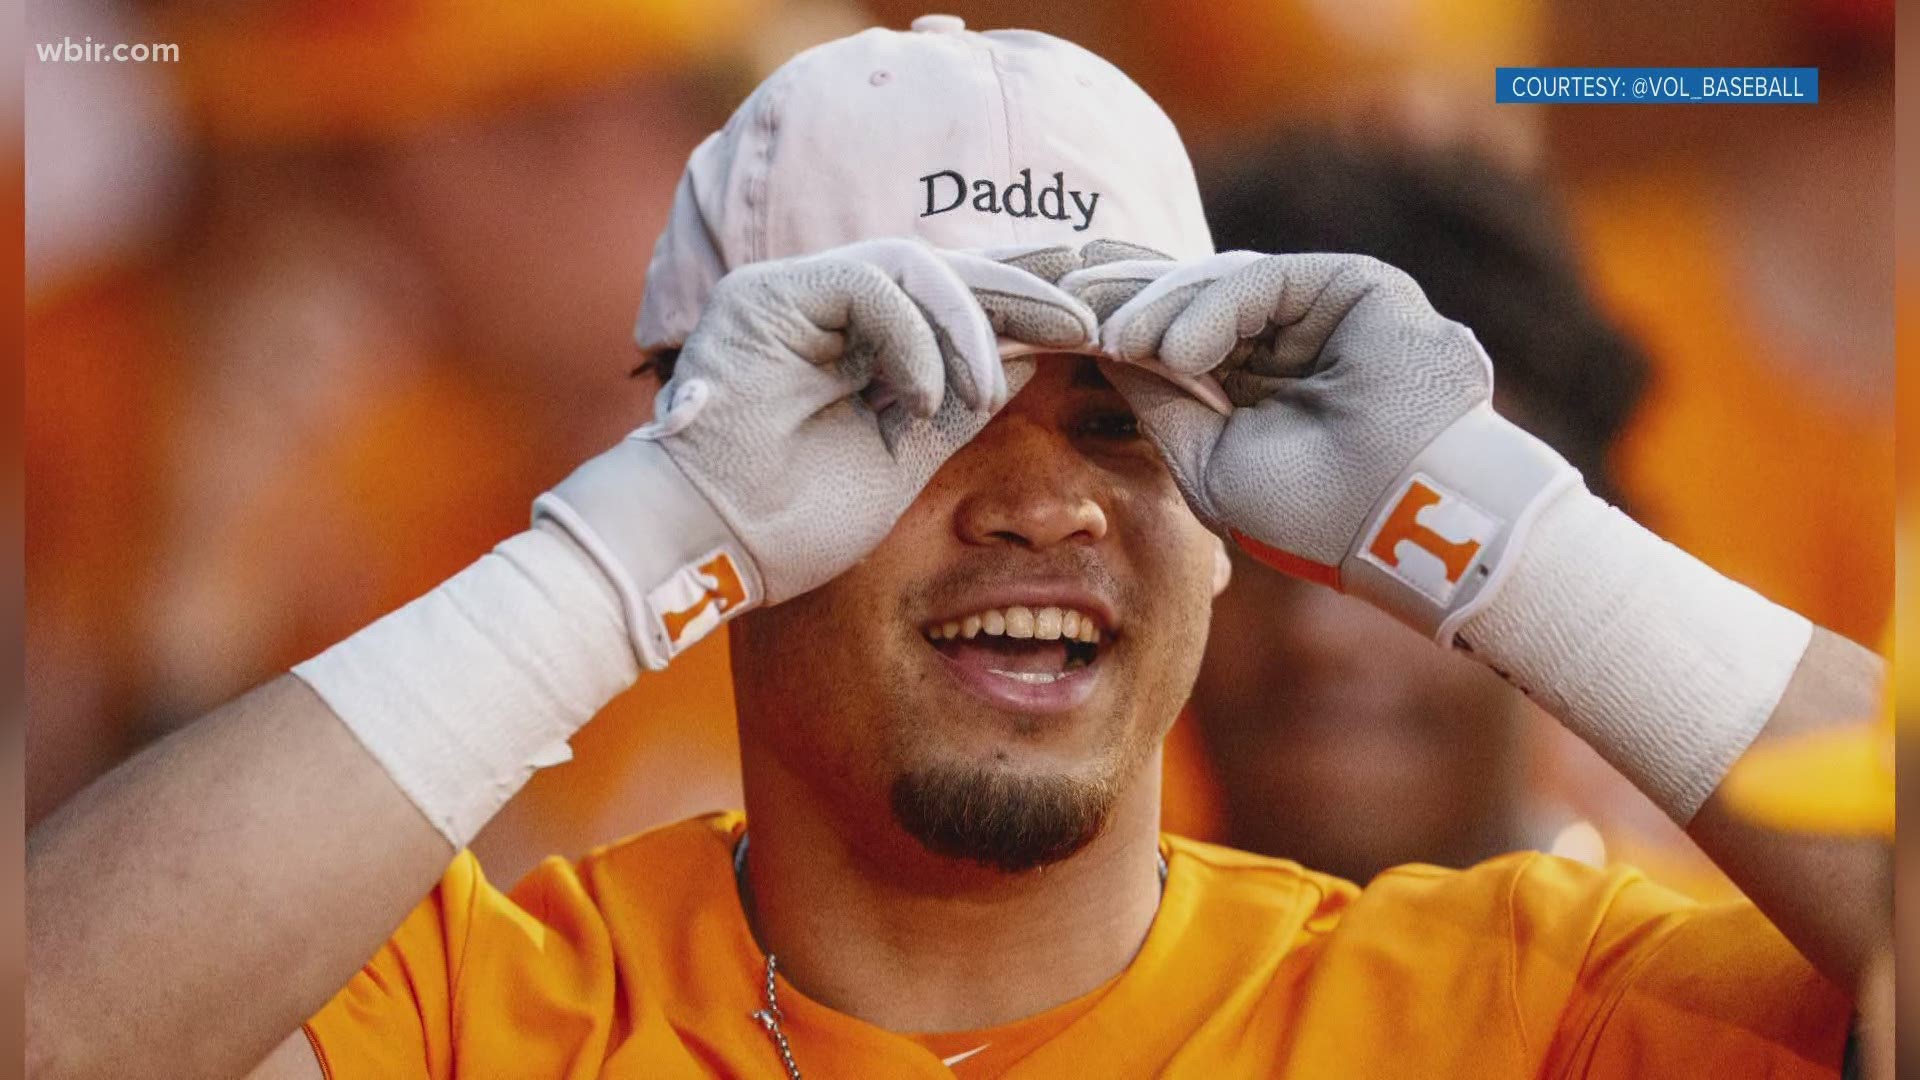 What's with Tennessee Vols baseball and the Daddy hat?